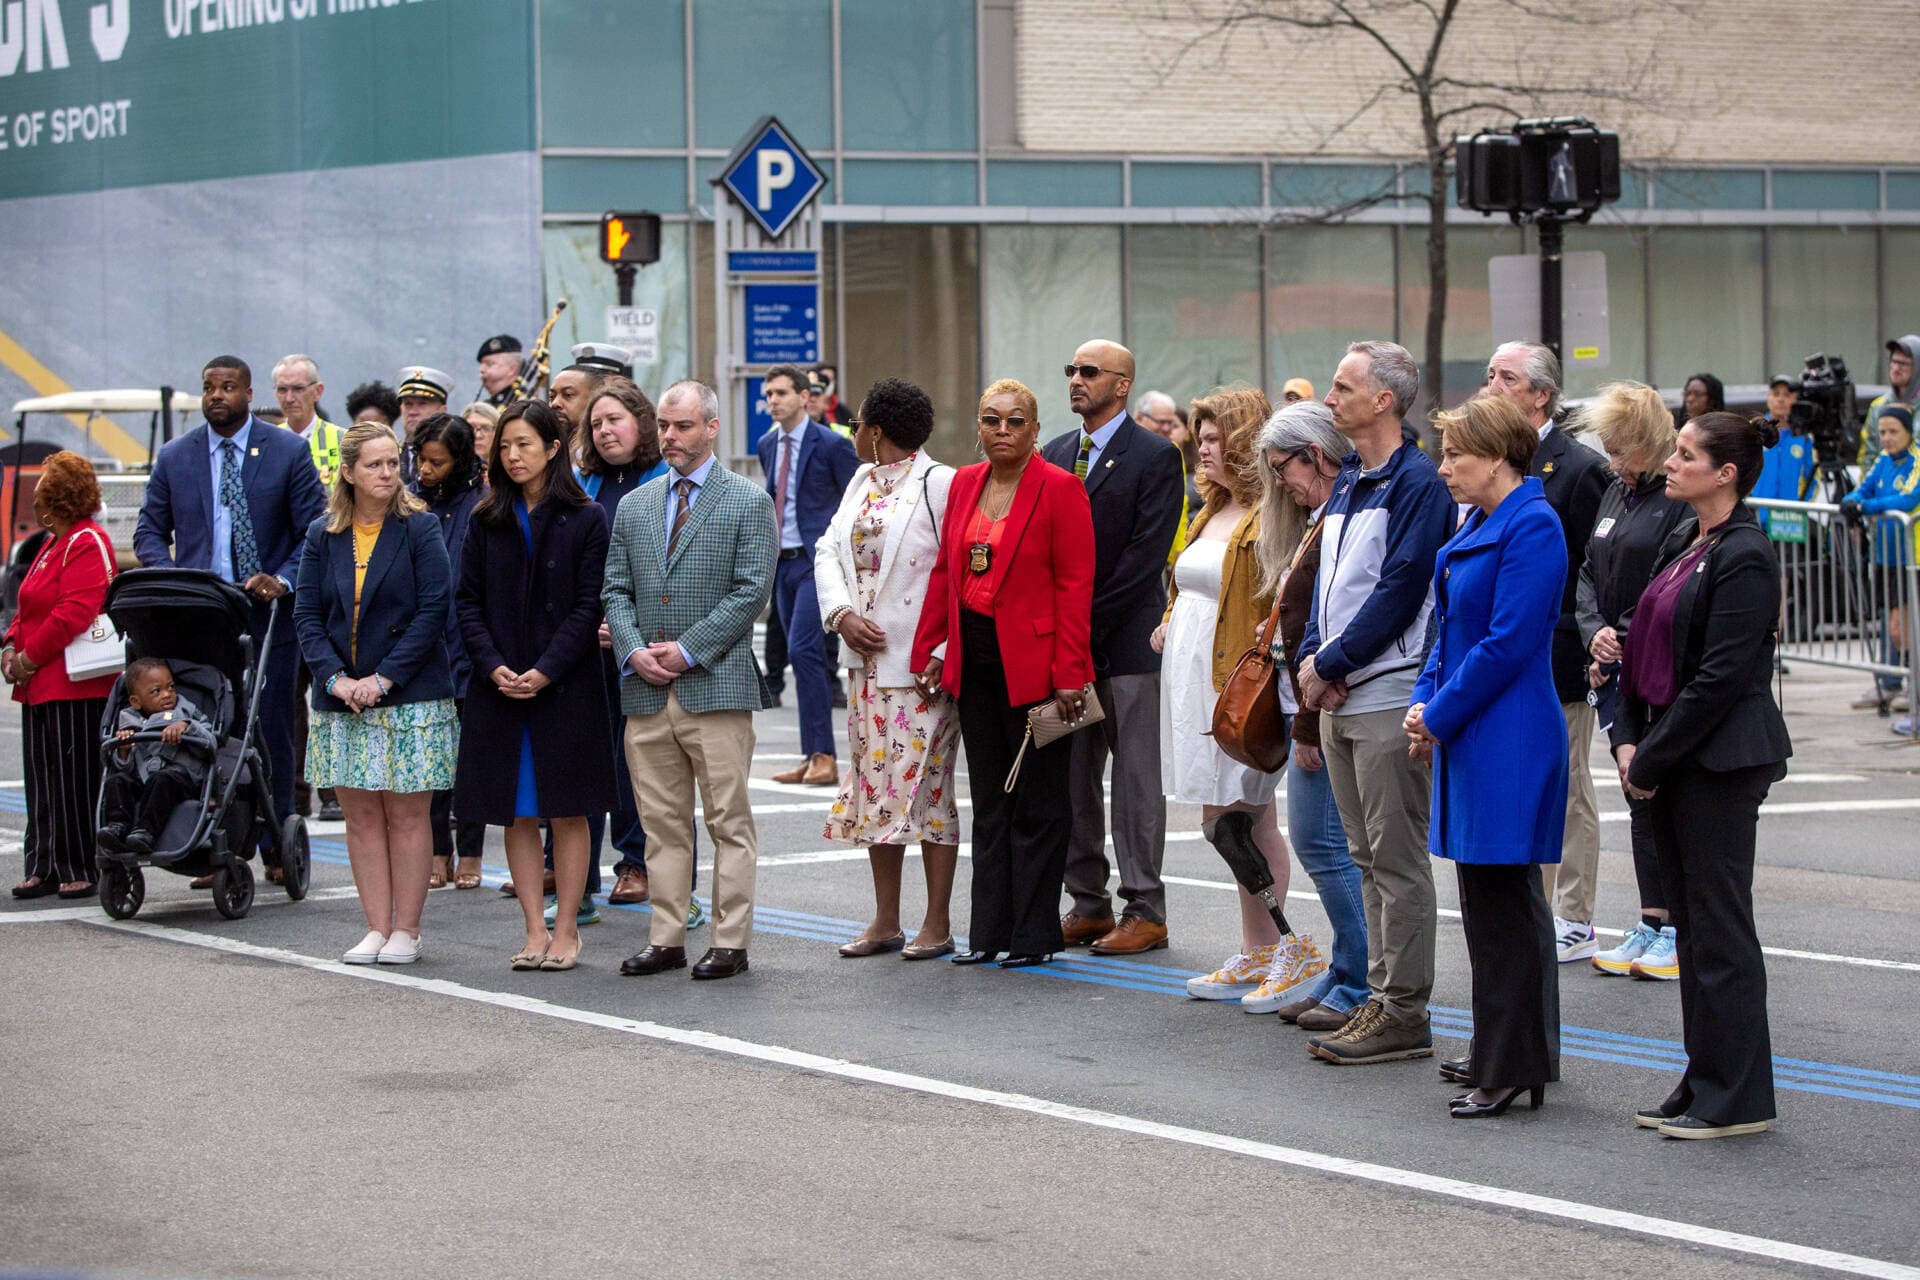 A brief and solemn ceremony was held early Saturday to mark the 10th anniversary of attack on the Boston Marathon. It was attended by several family members of victims of the bombings, as well as Gov. Maura Healey and Mayor Michelle Wu. (Robin Lubbock/WBUR)